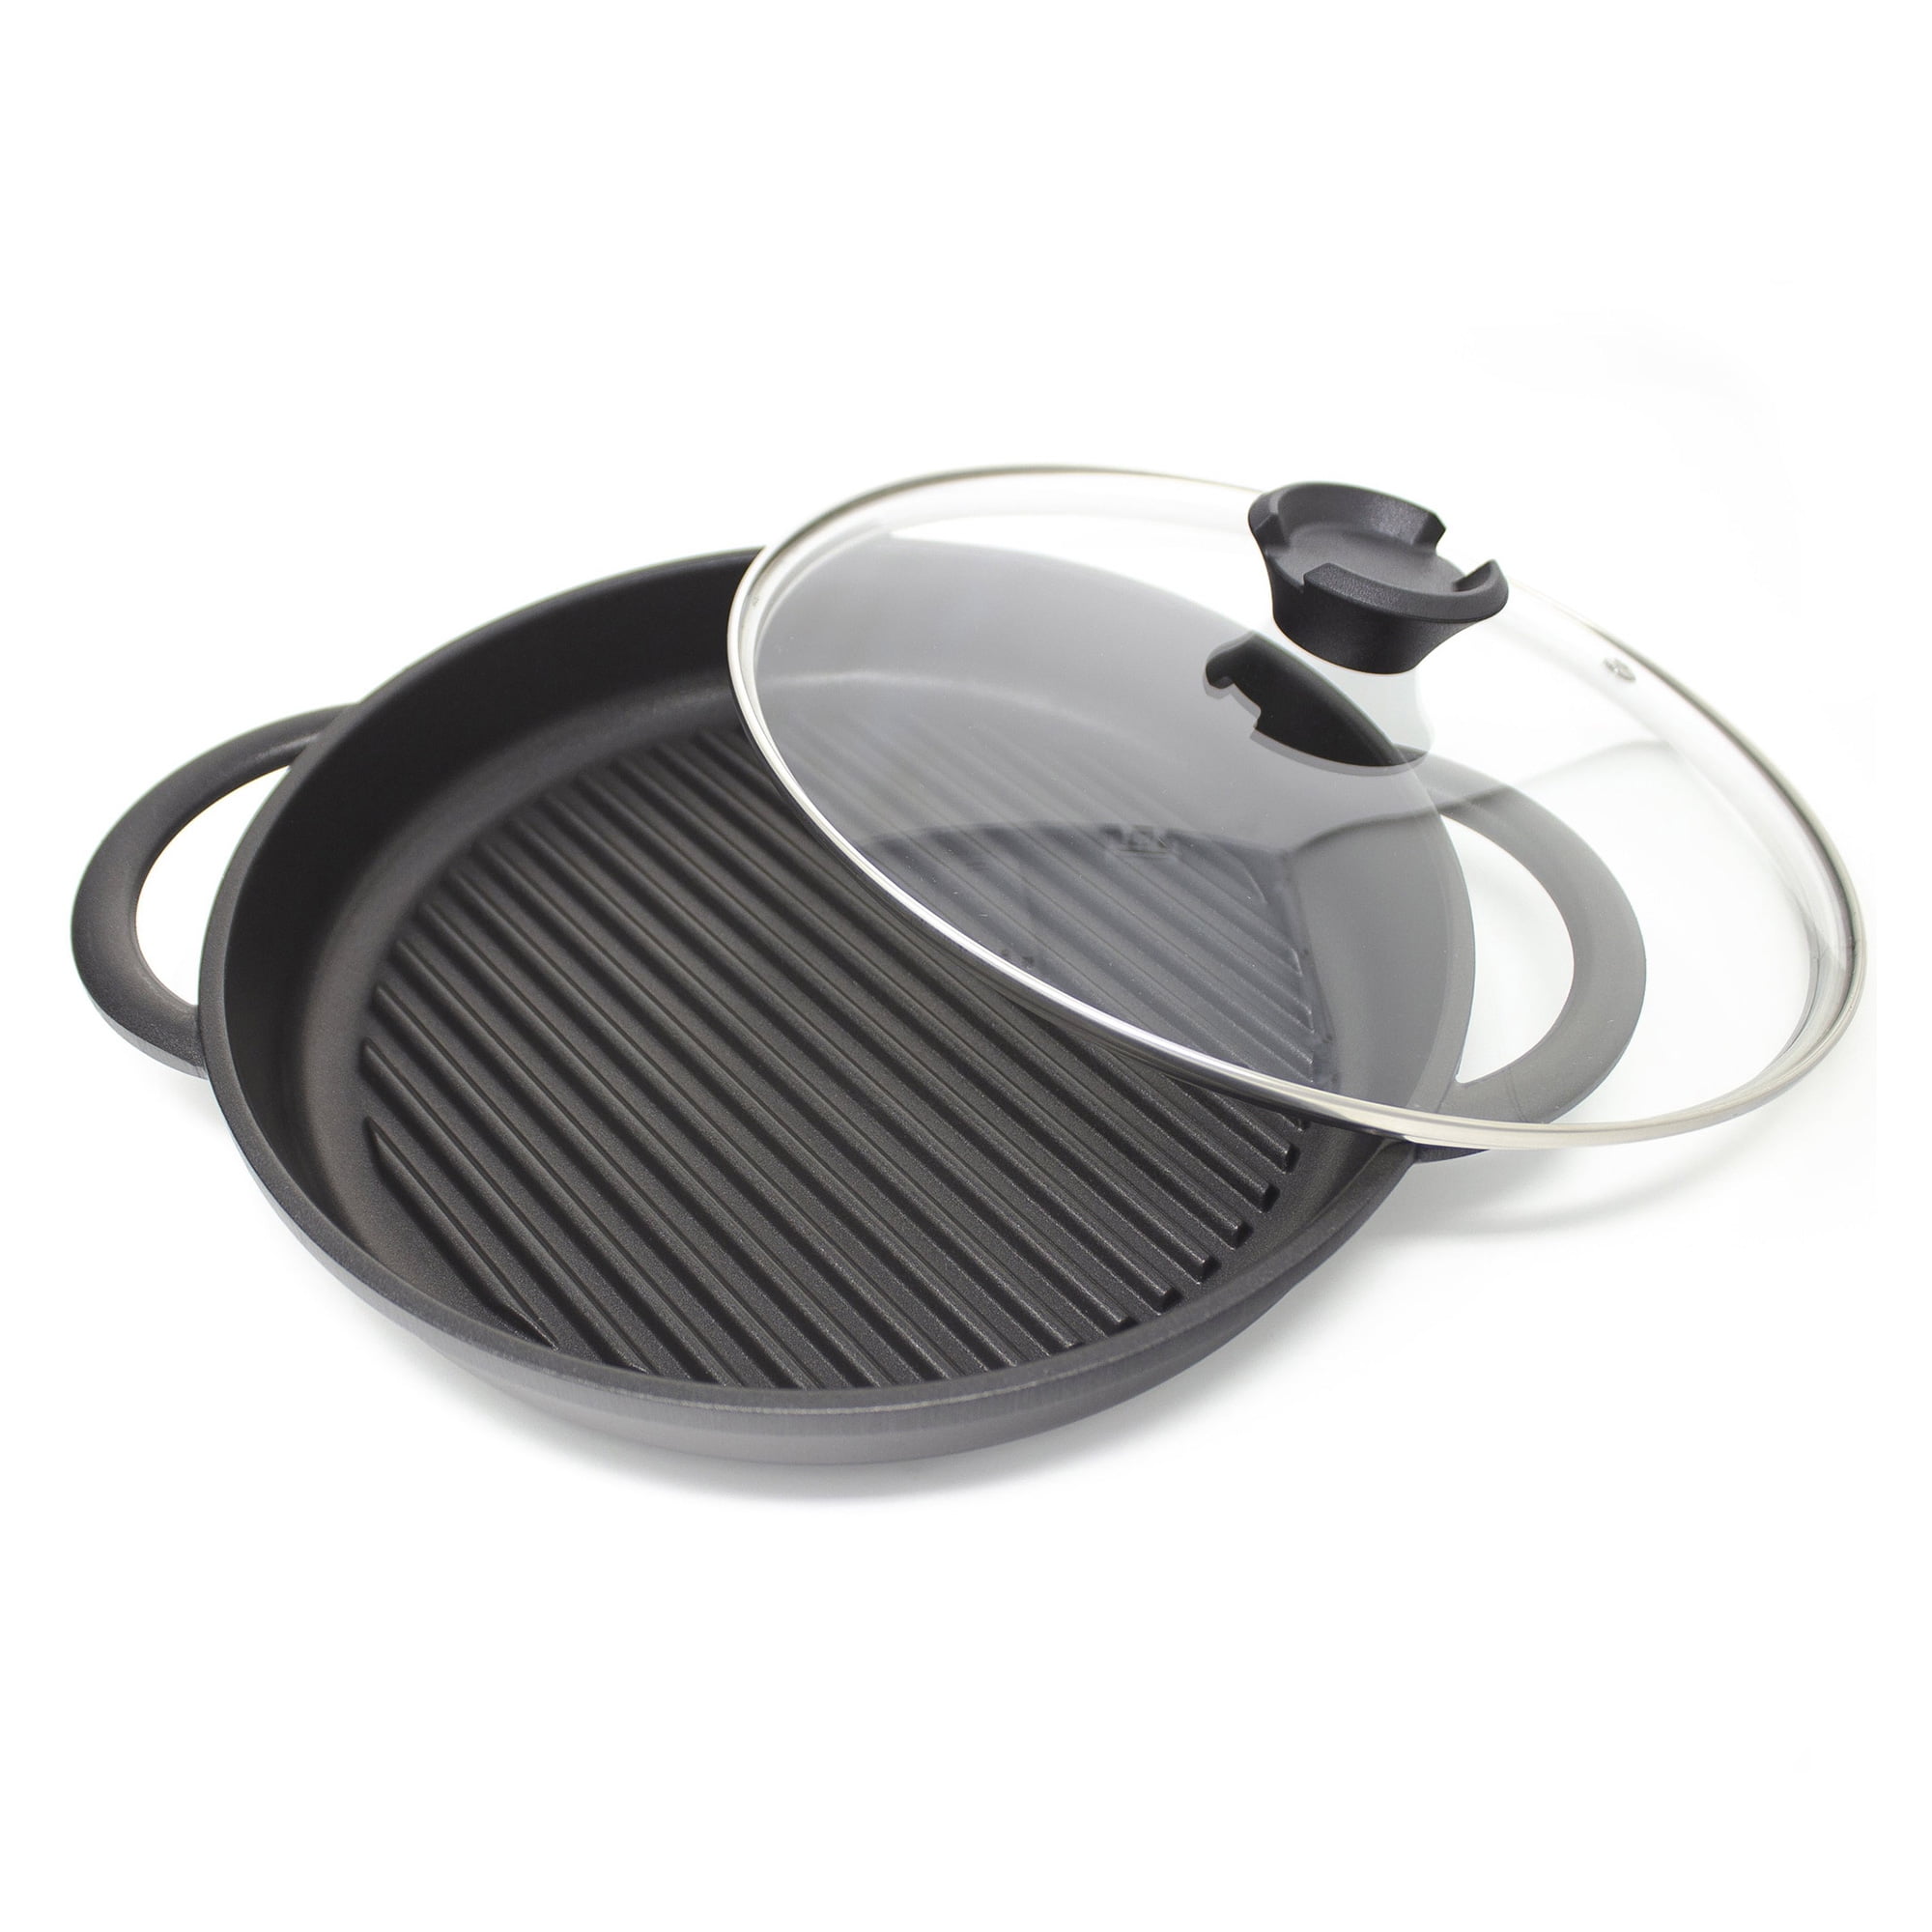 Jean Patrique The Meat Master - Smart Griddle Pan with Built-in Thermometer